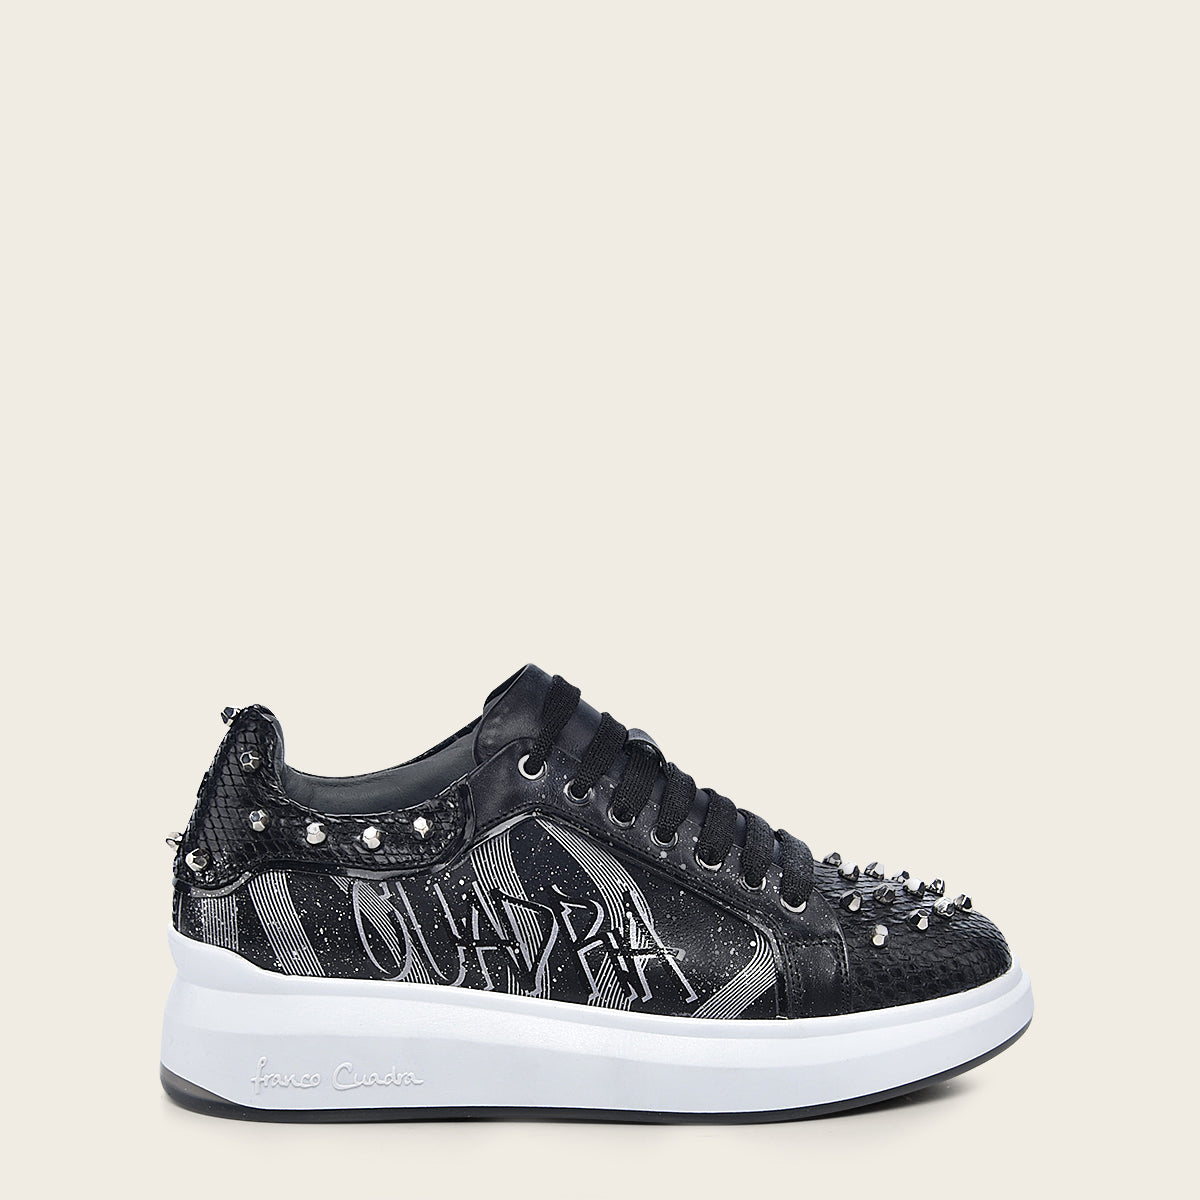 Genuine python black leather sneakers and metallic studs